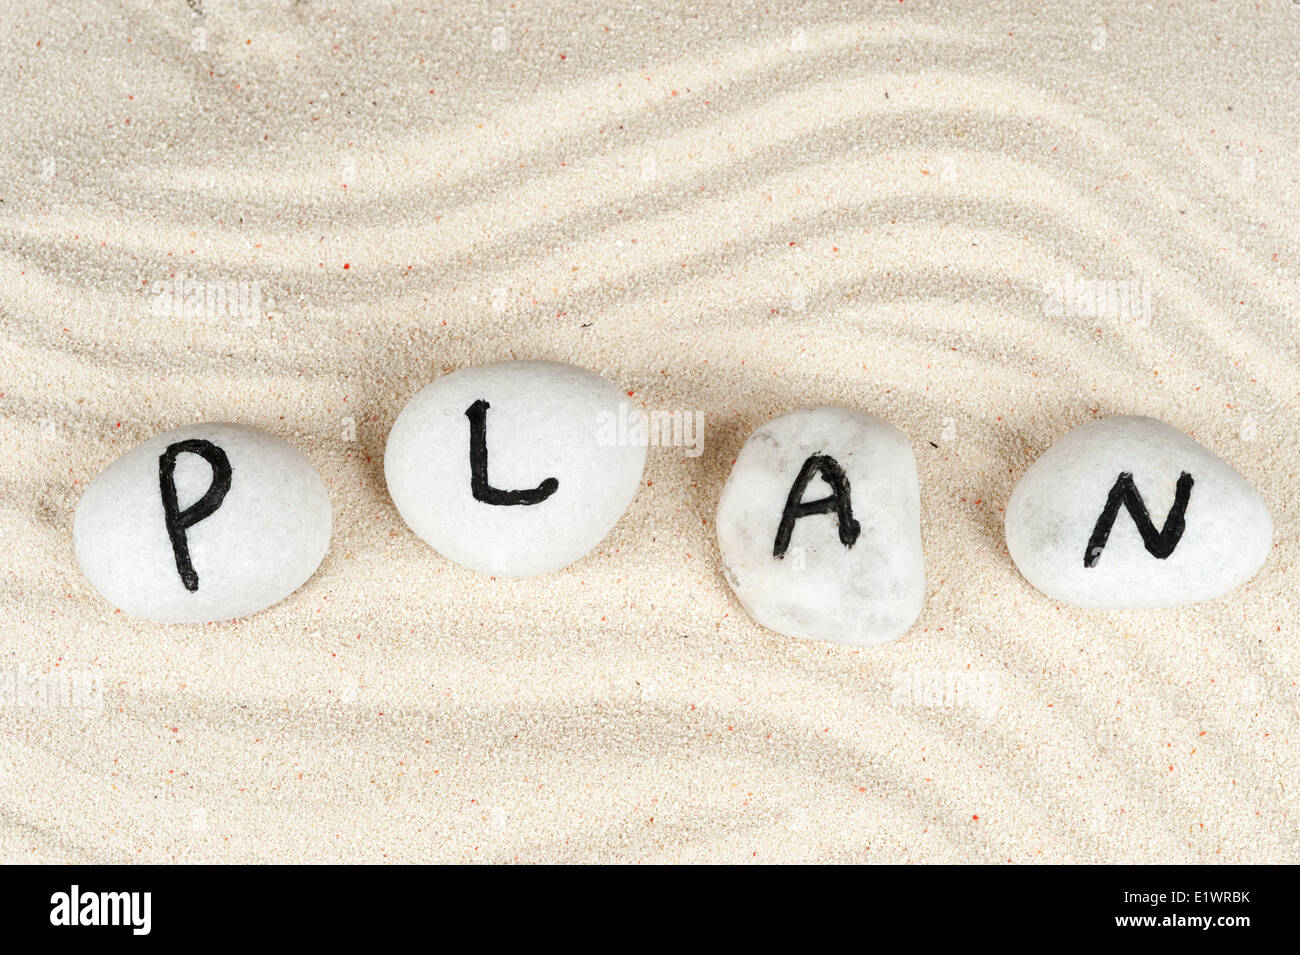 Plan word on group of pebbles Stock Photo